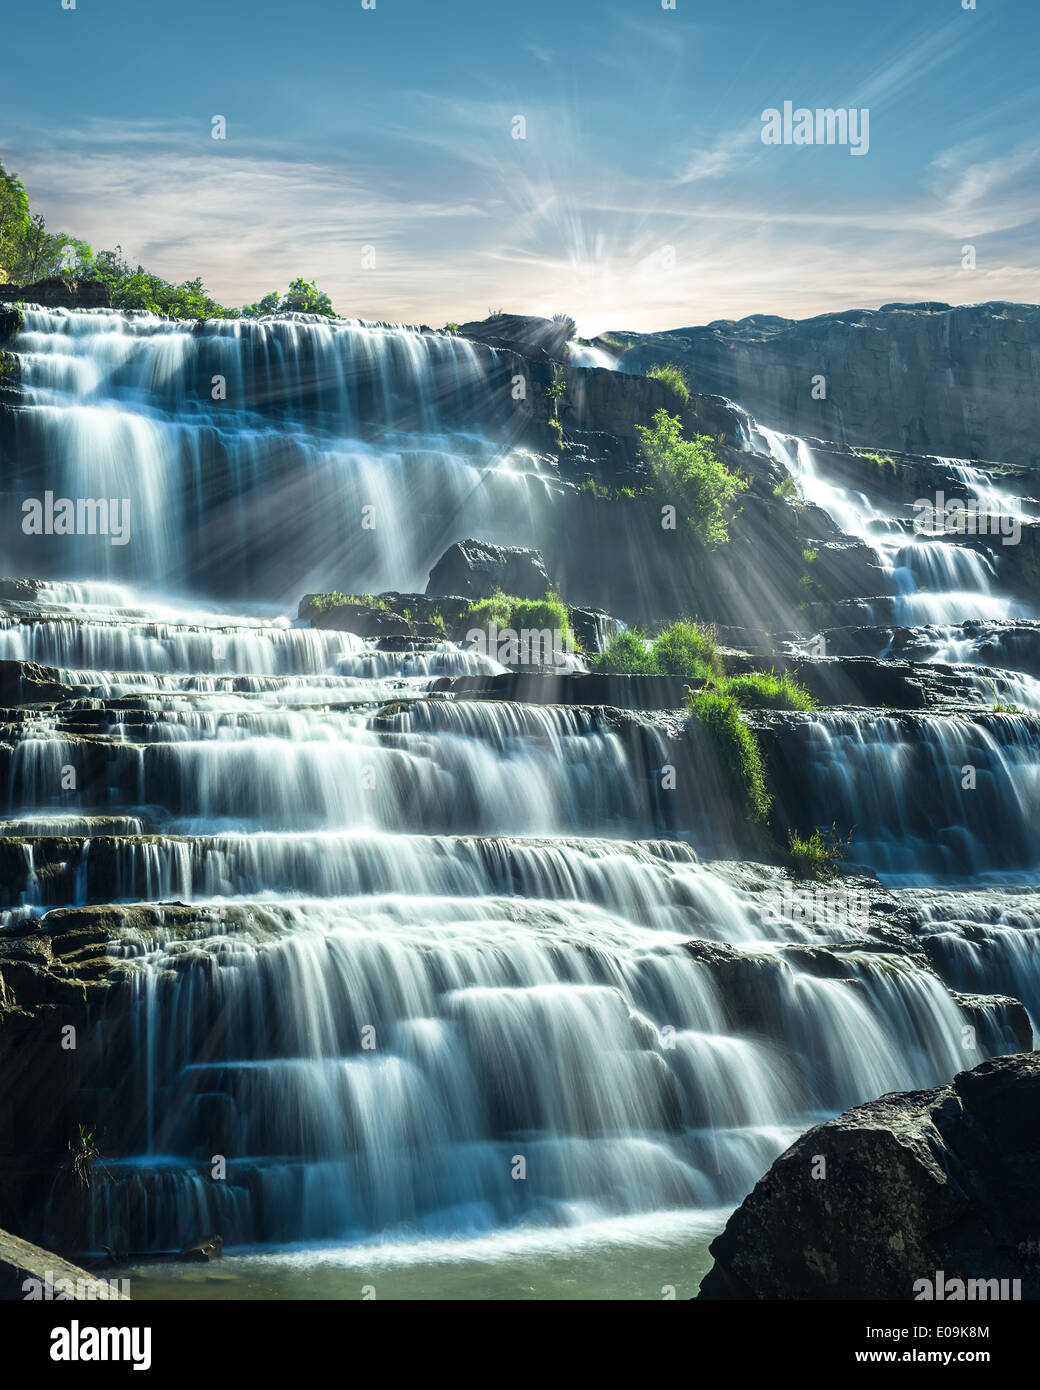 Tropical rain forest landscape with flowing blue water of Pongour waterfall at sunny day under blue sky. Da Lat, Vietnam Stock Photo